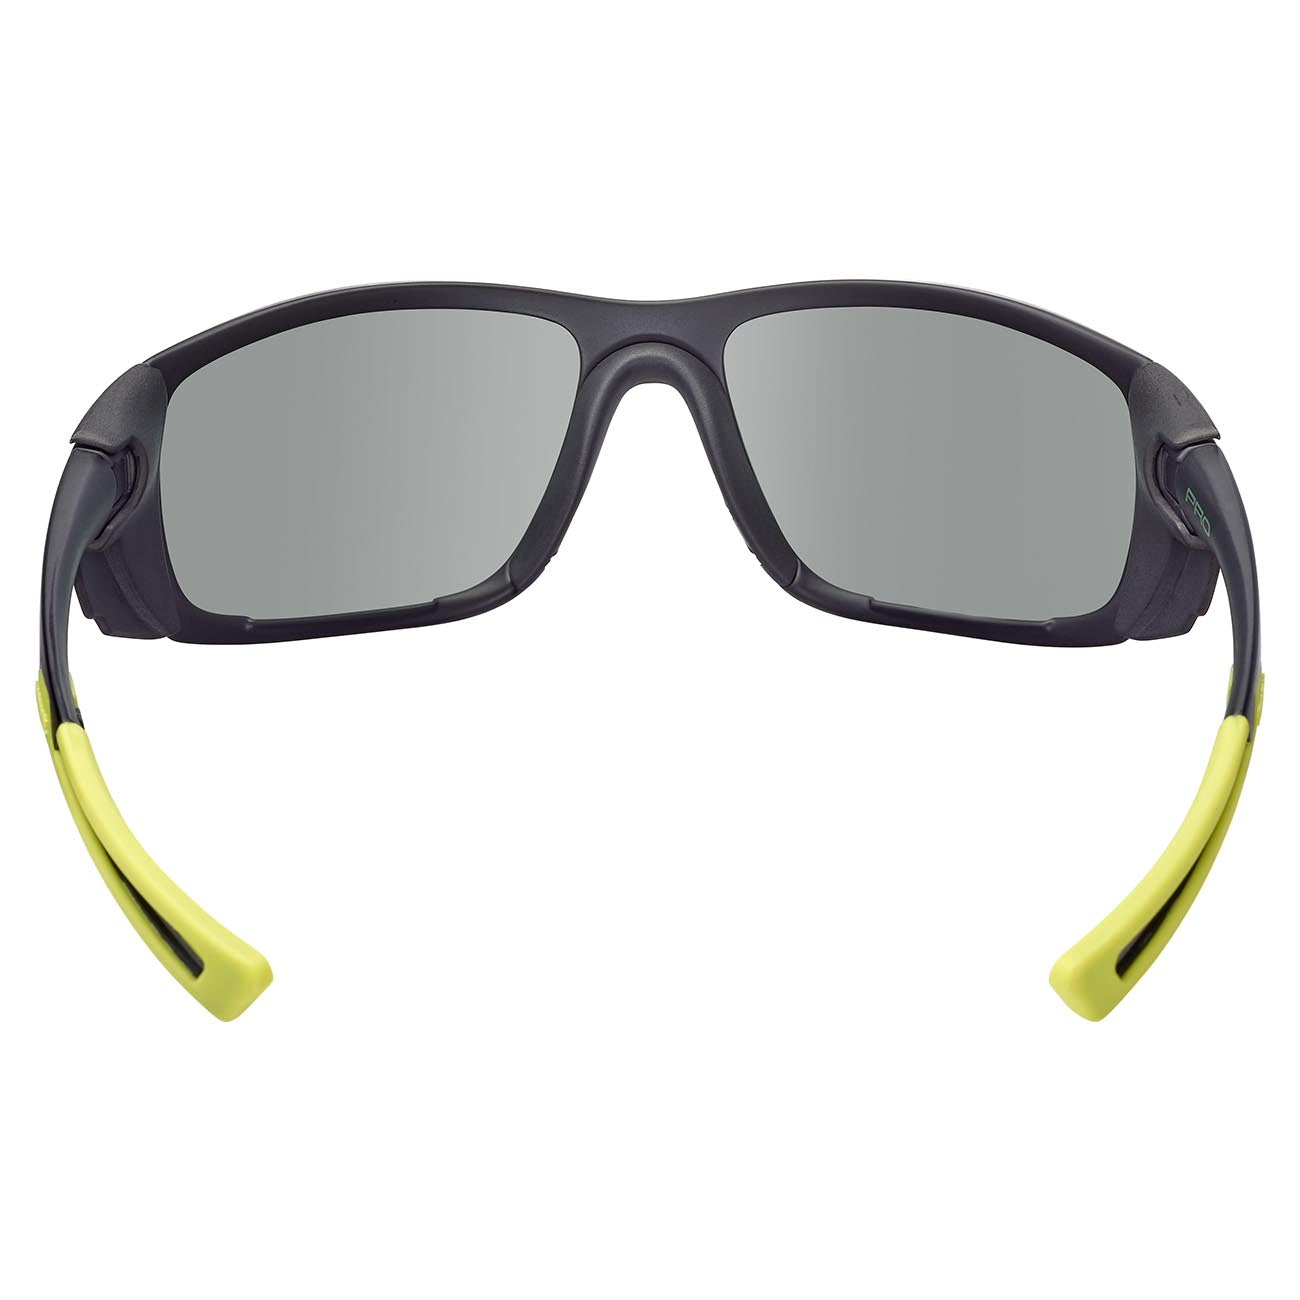 Cebe PROGUIDE Hiking and Mountaineering Sunglasses - CS06701